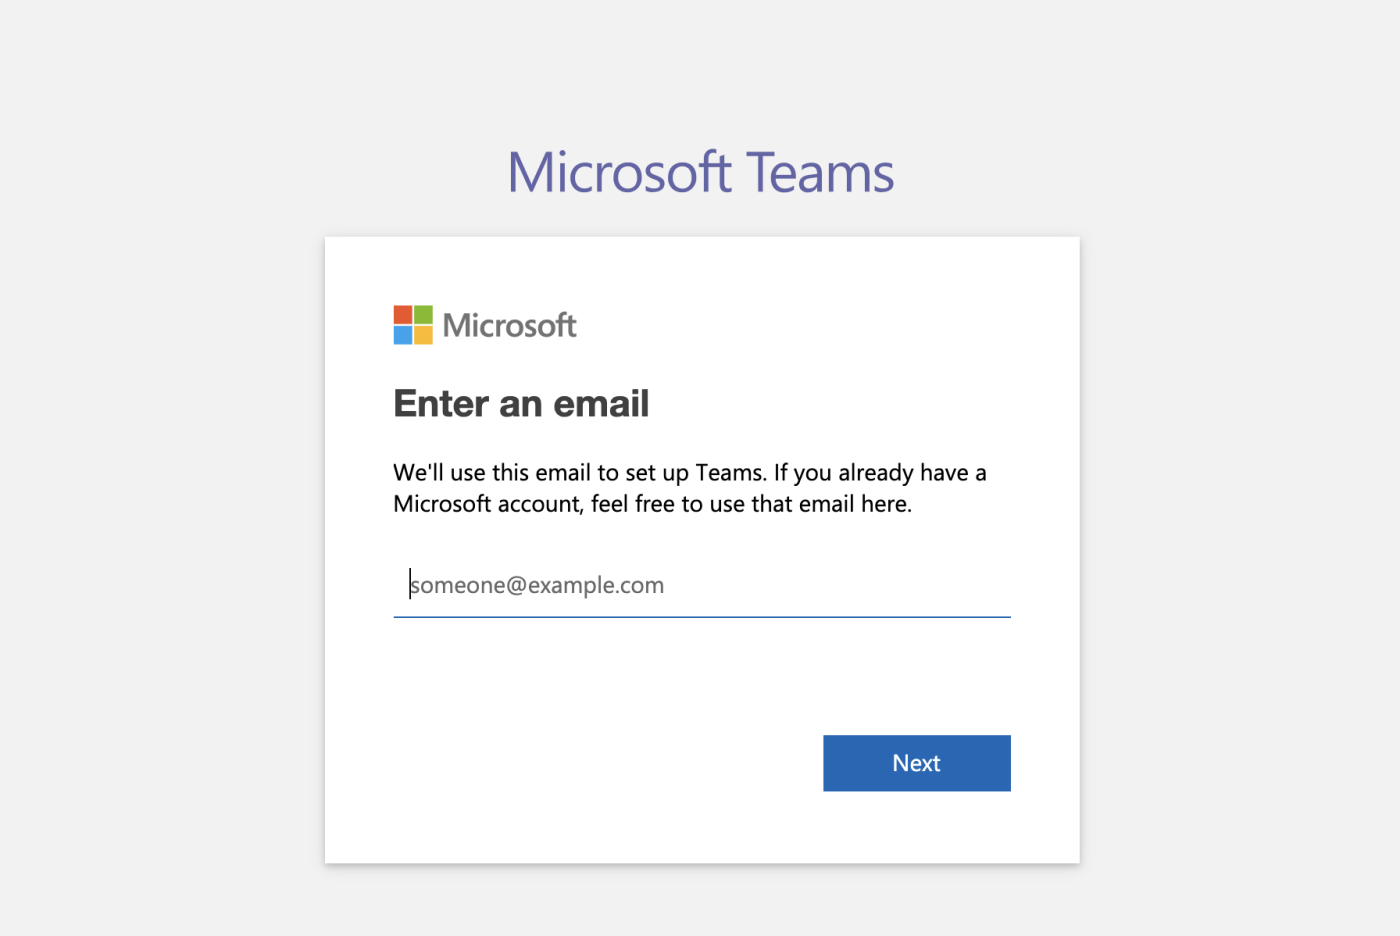 Signing up for Microsoft Teams